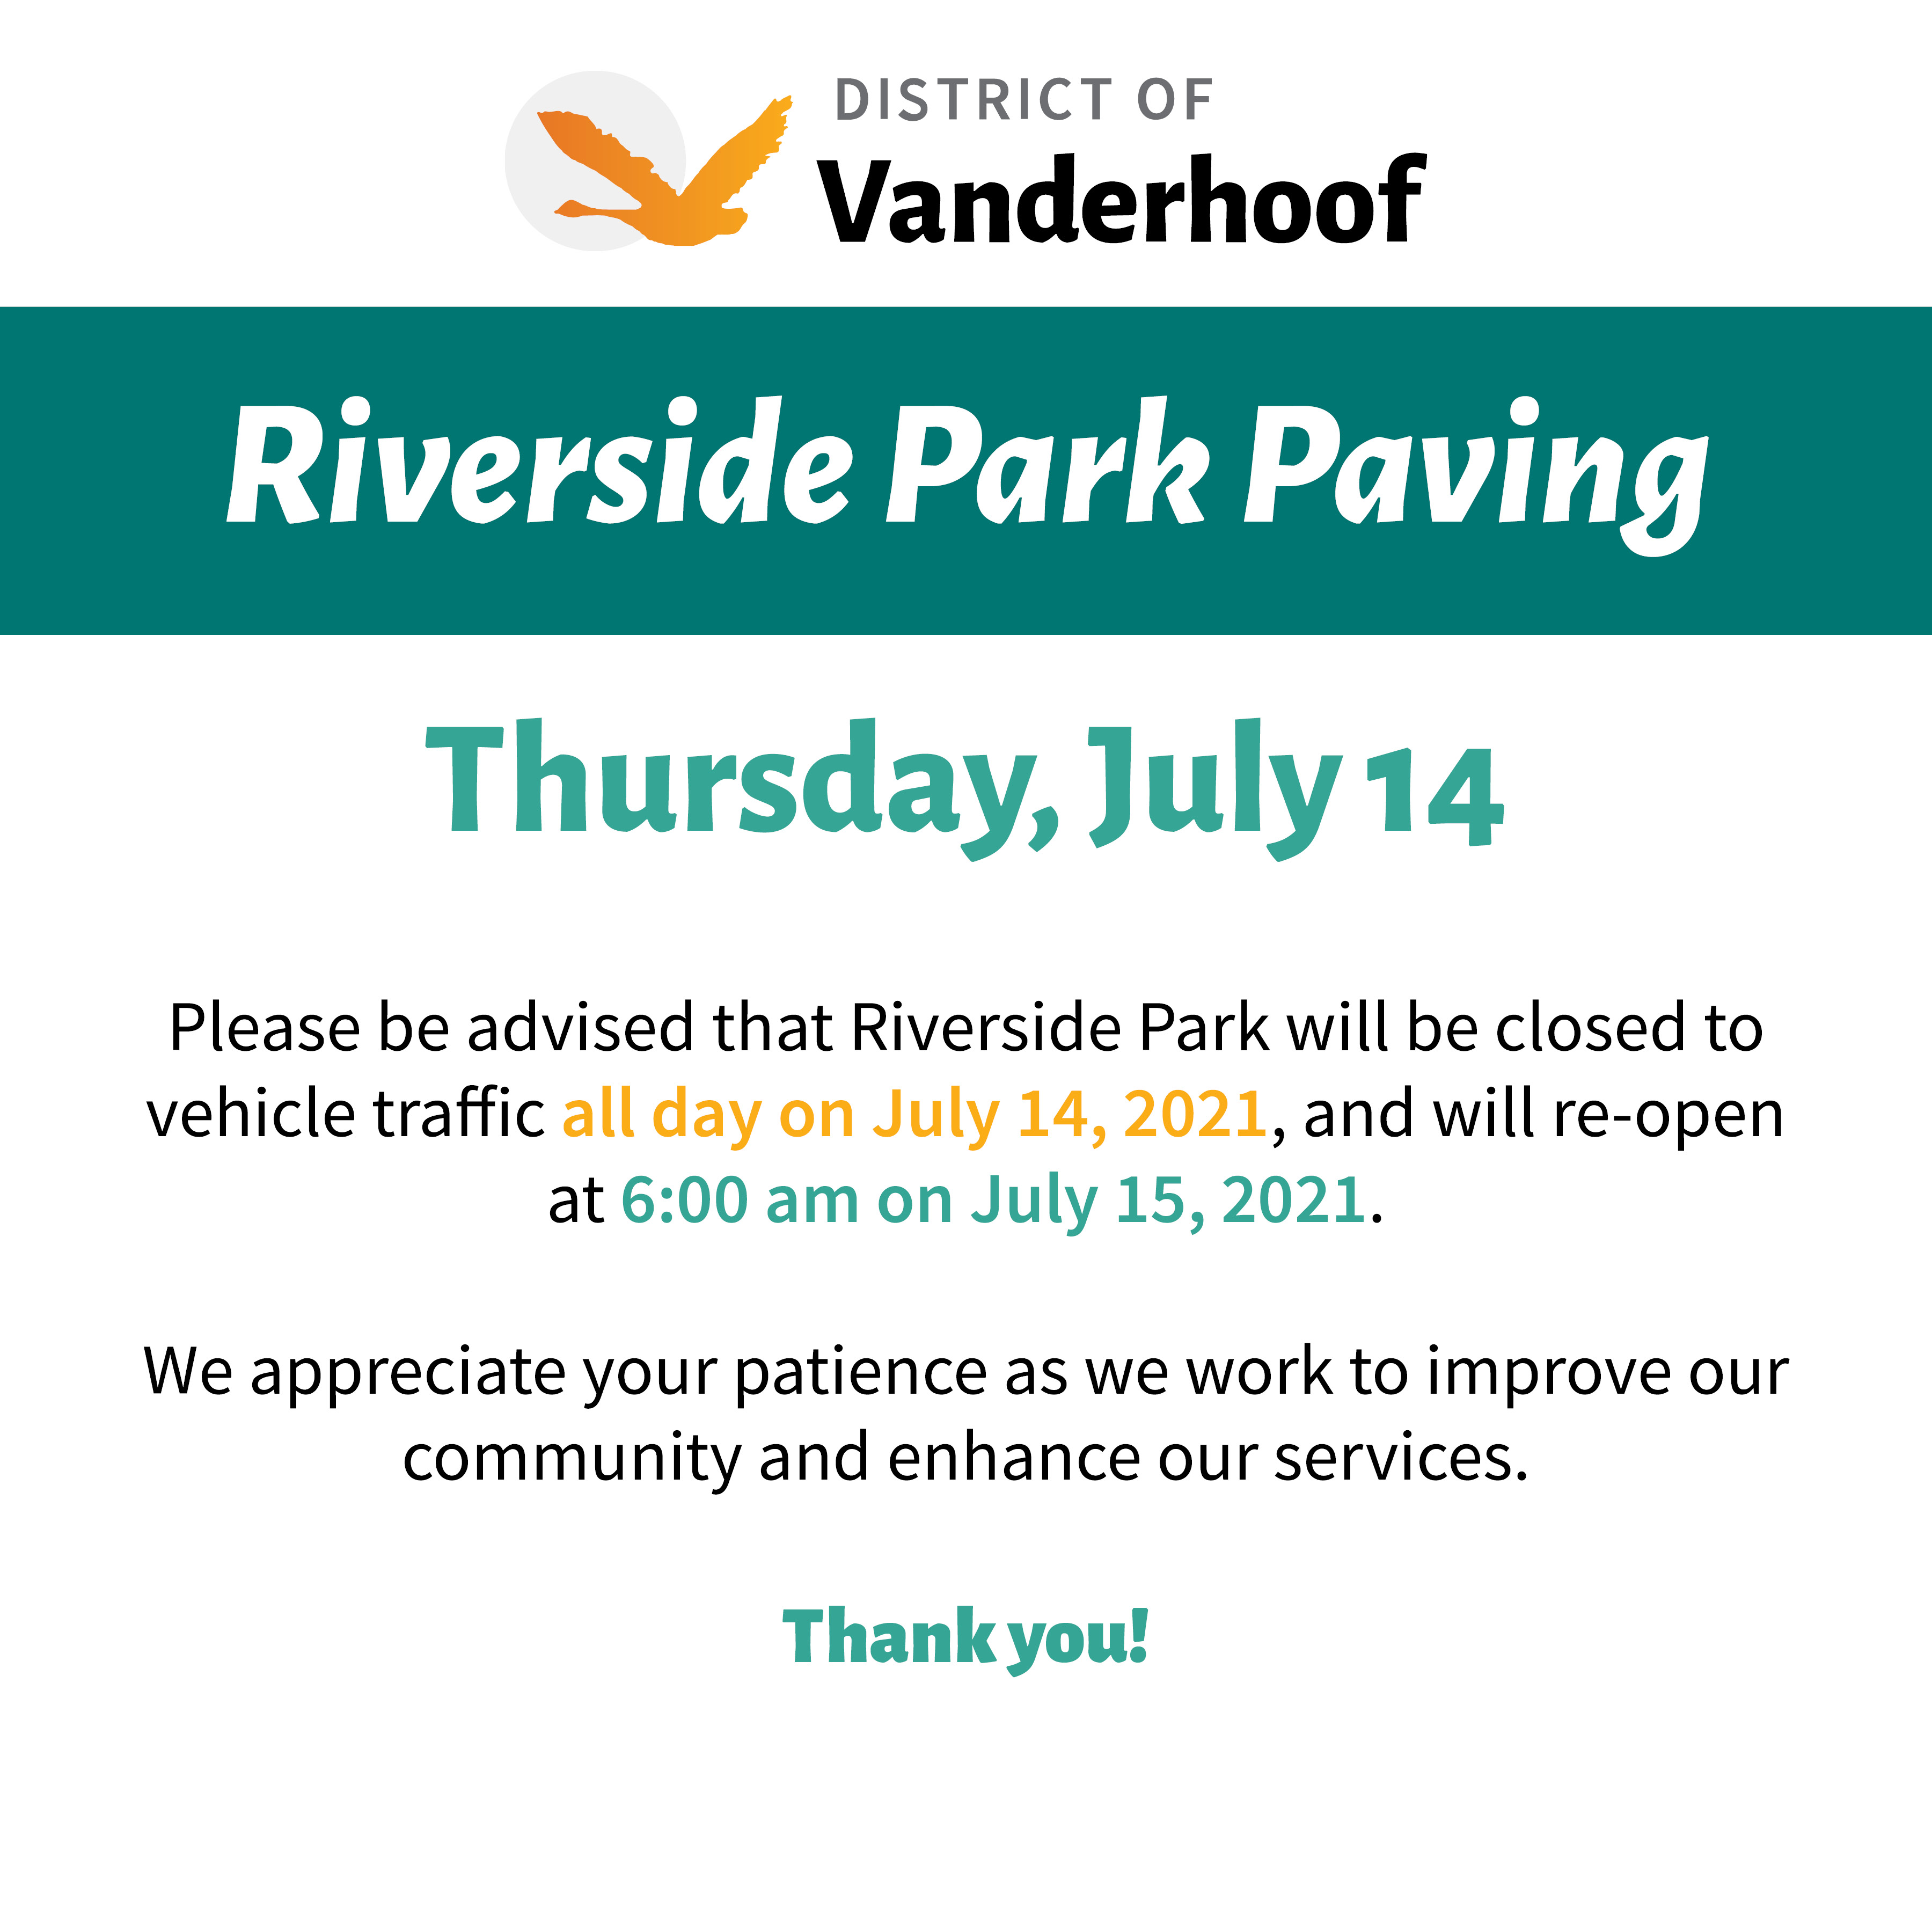 Riverside Park Paving, Thursday July 14. Please be advised that Riverside Park will be closed to vehicle traffic all day on July 14, 2021, and will re-open at 6:00 am on July 15, 2021. We appreciate your patience as we work to improve our community and enhance our services. Thank you!